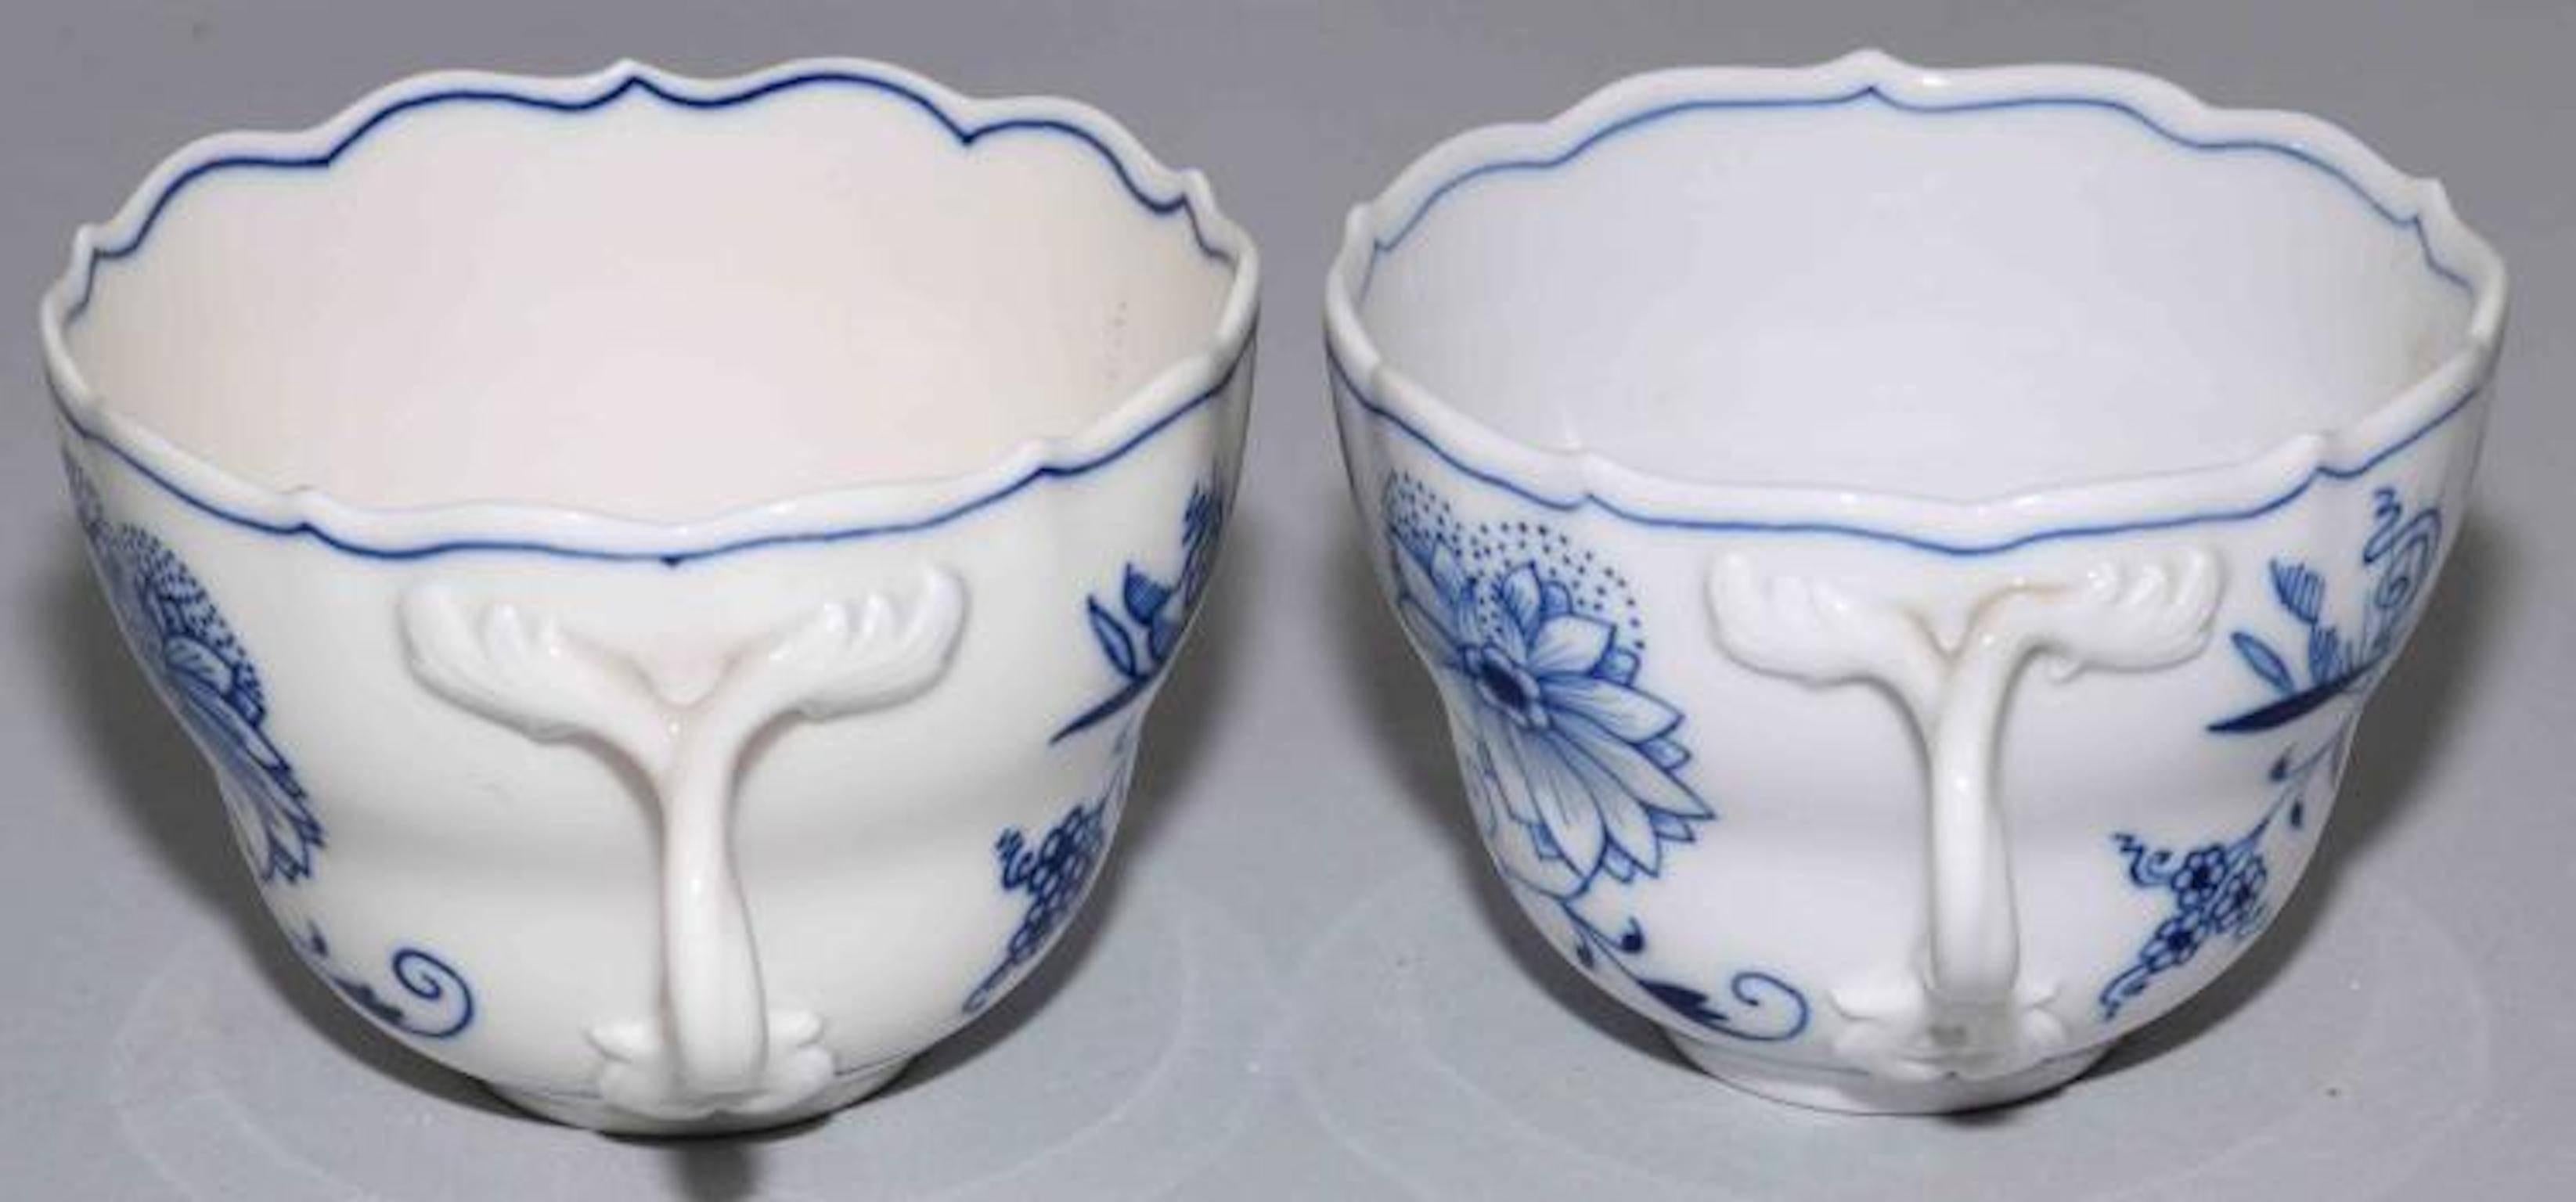 19th Century Meissen Porcelain Blue Onion Cups and Saucers, Set of Two For Sale